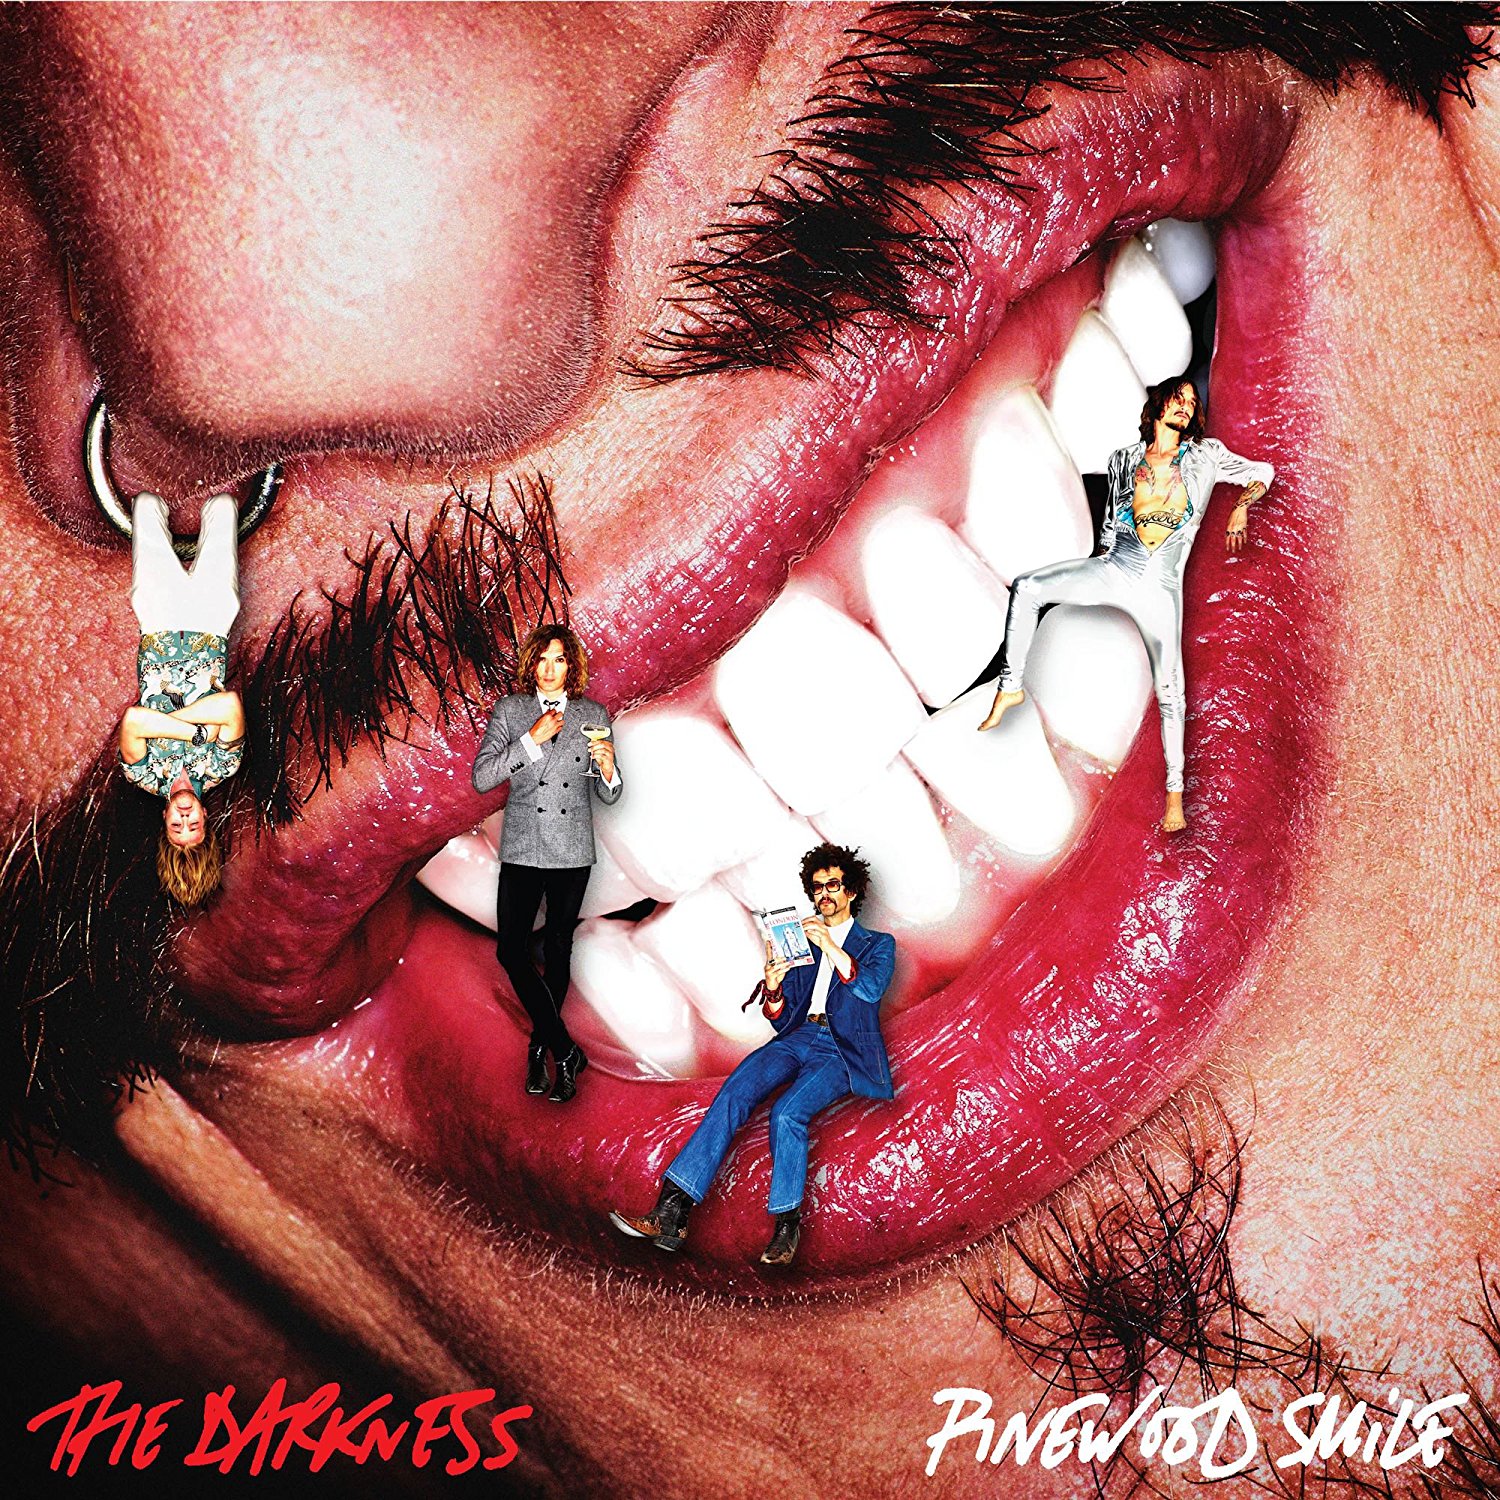 The Darkness : Pinewood Smile